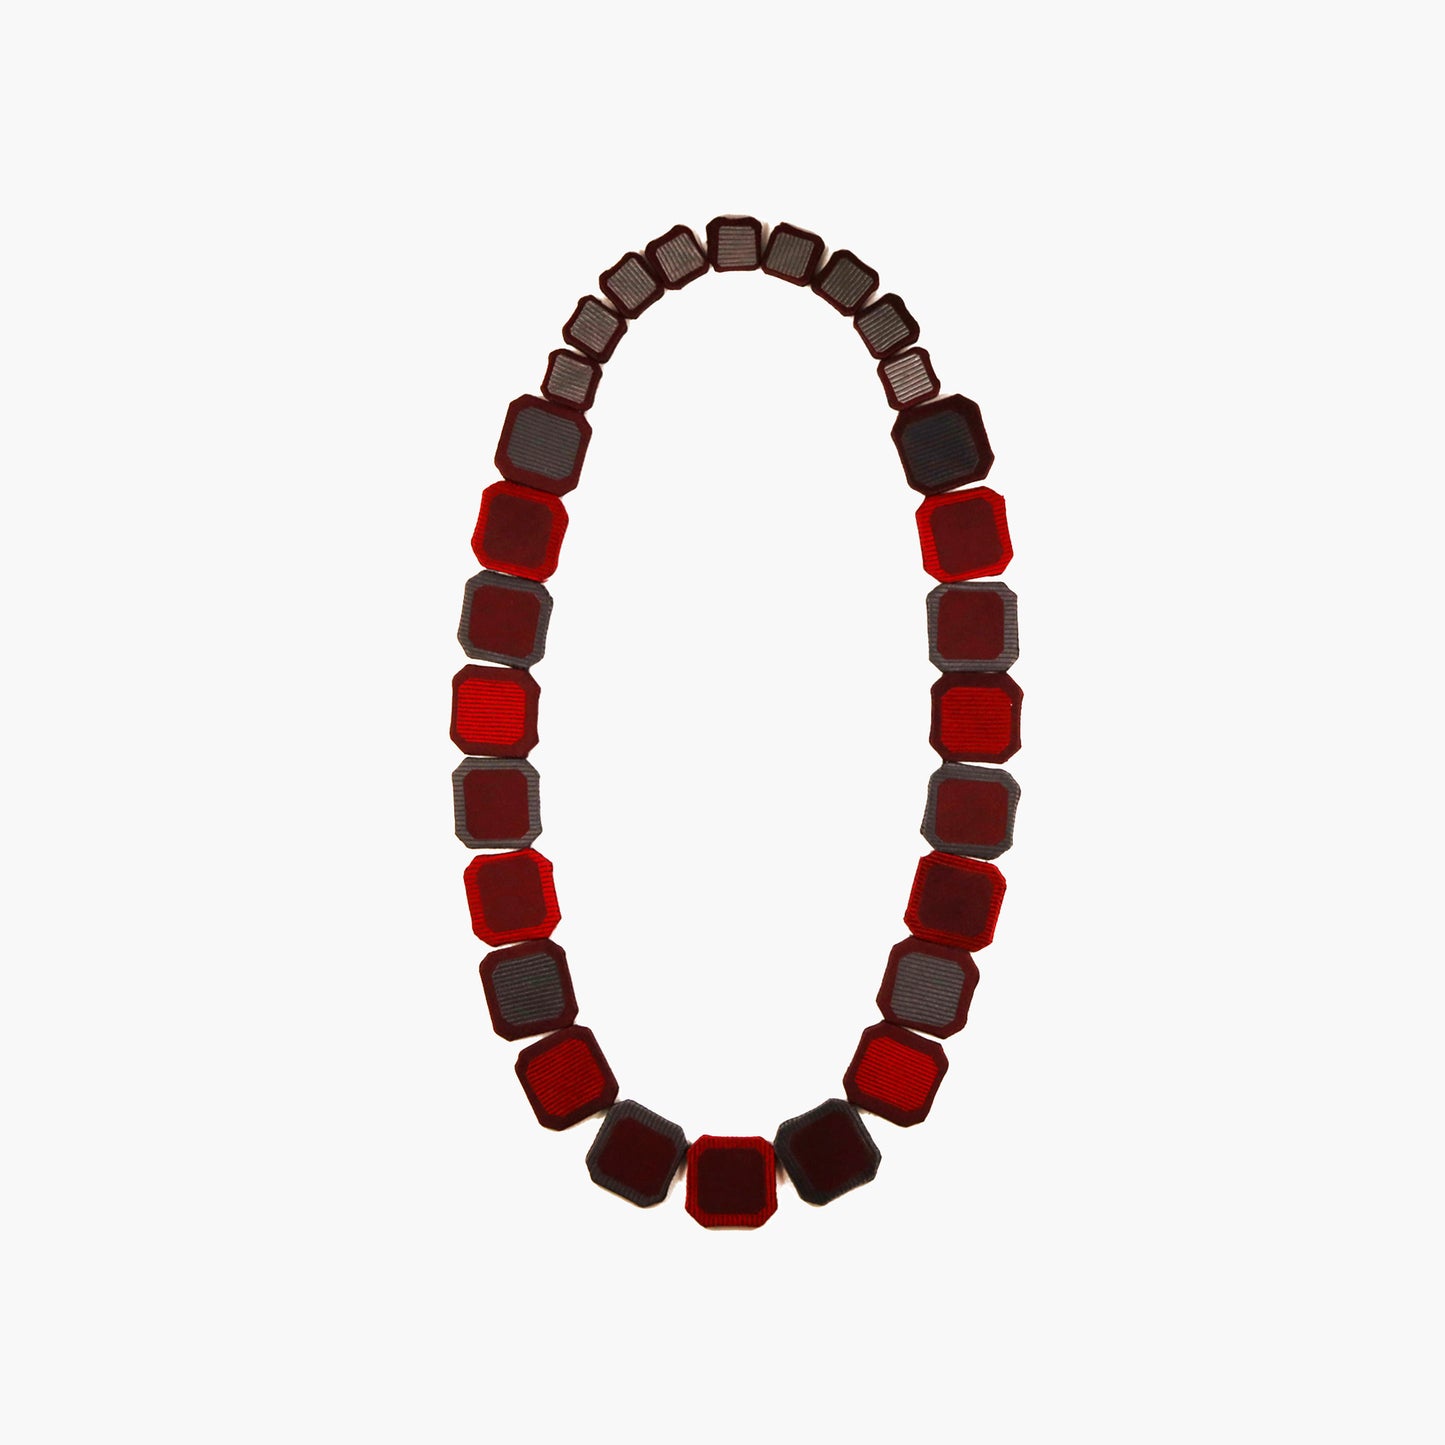 Reauthorized in Red necklace